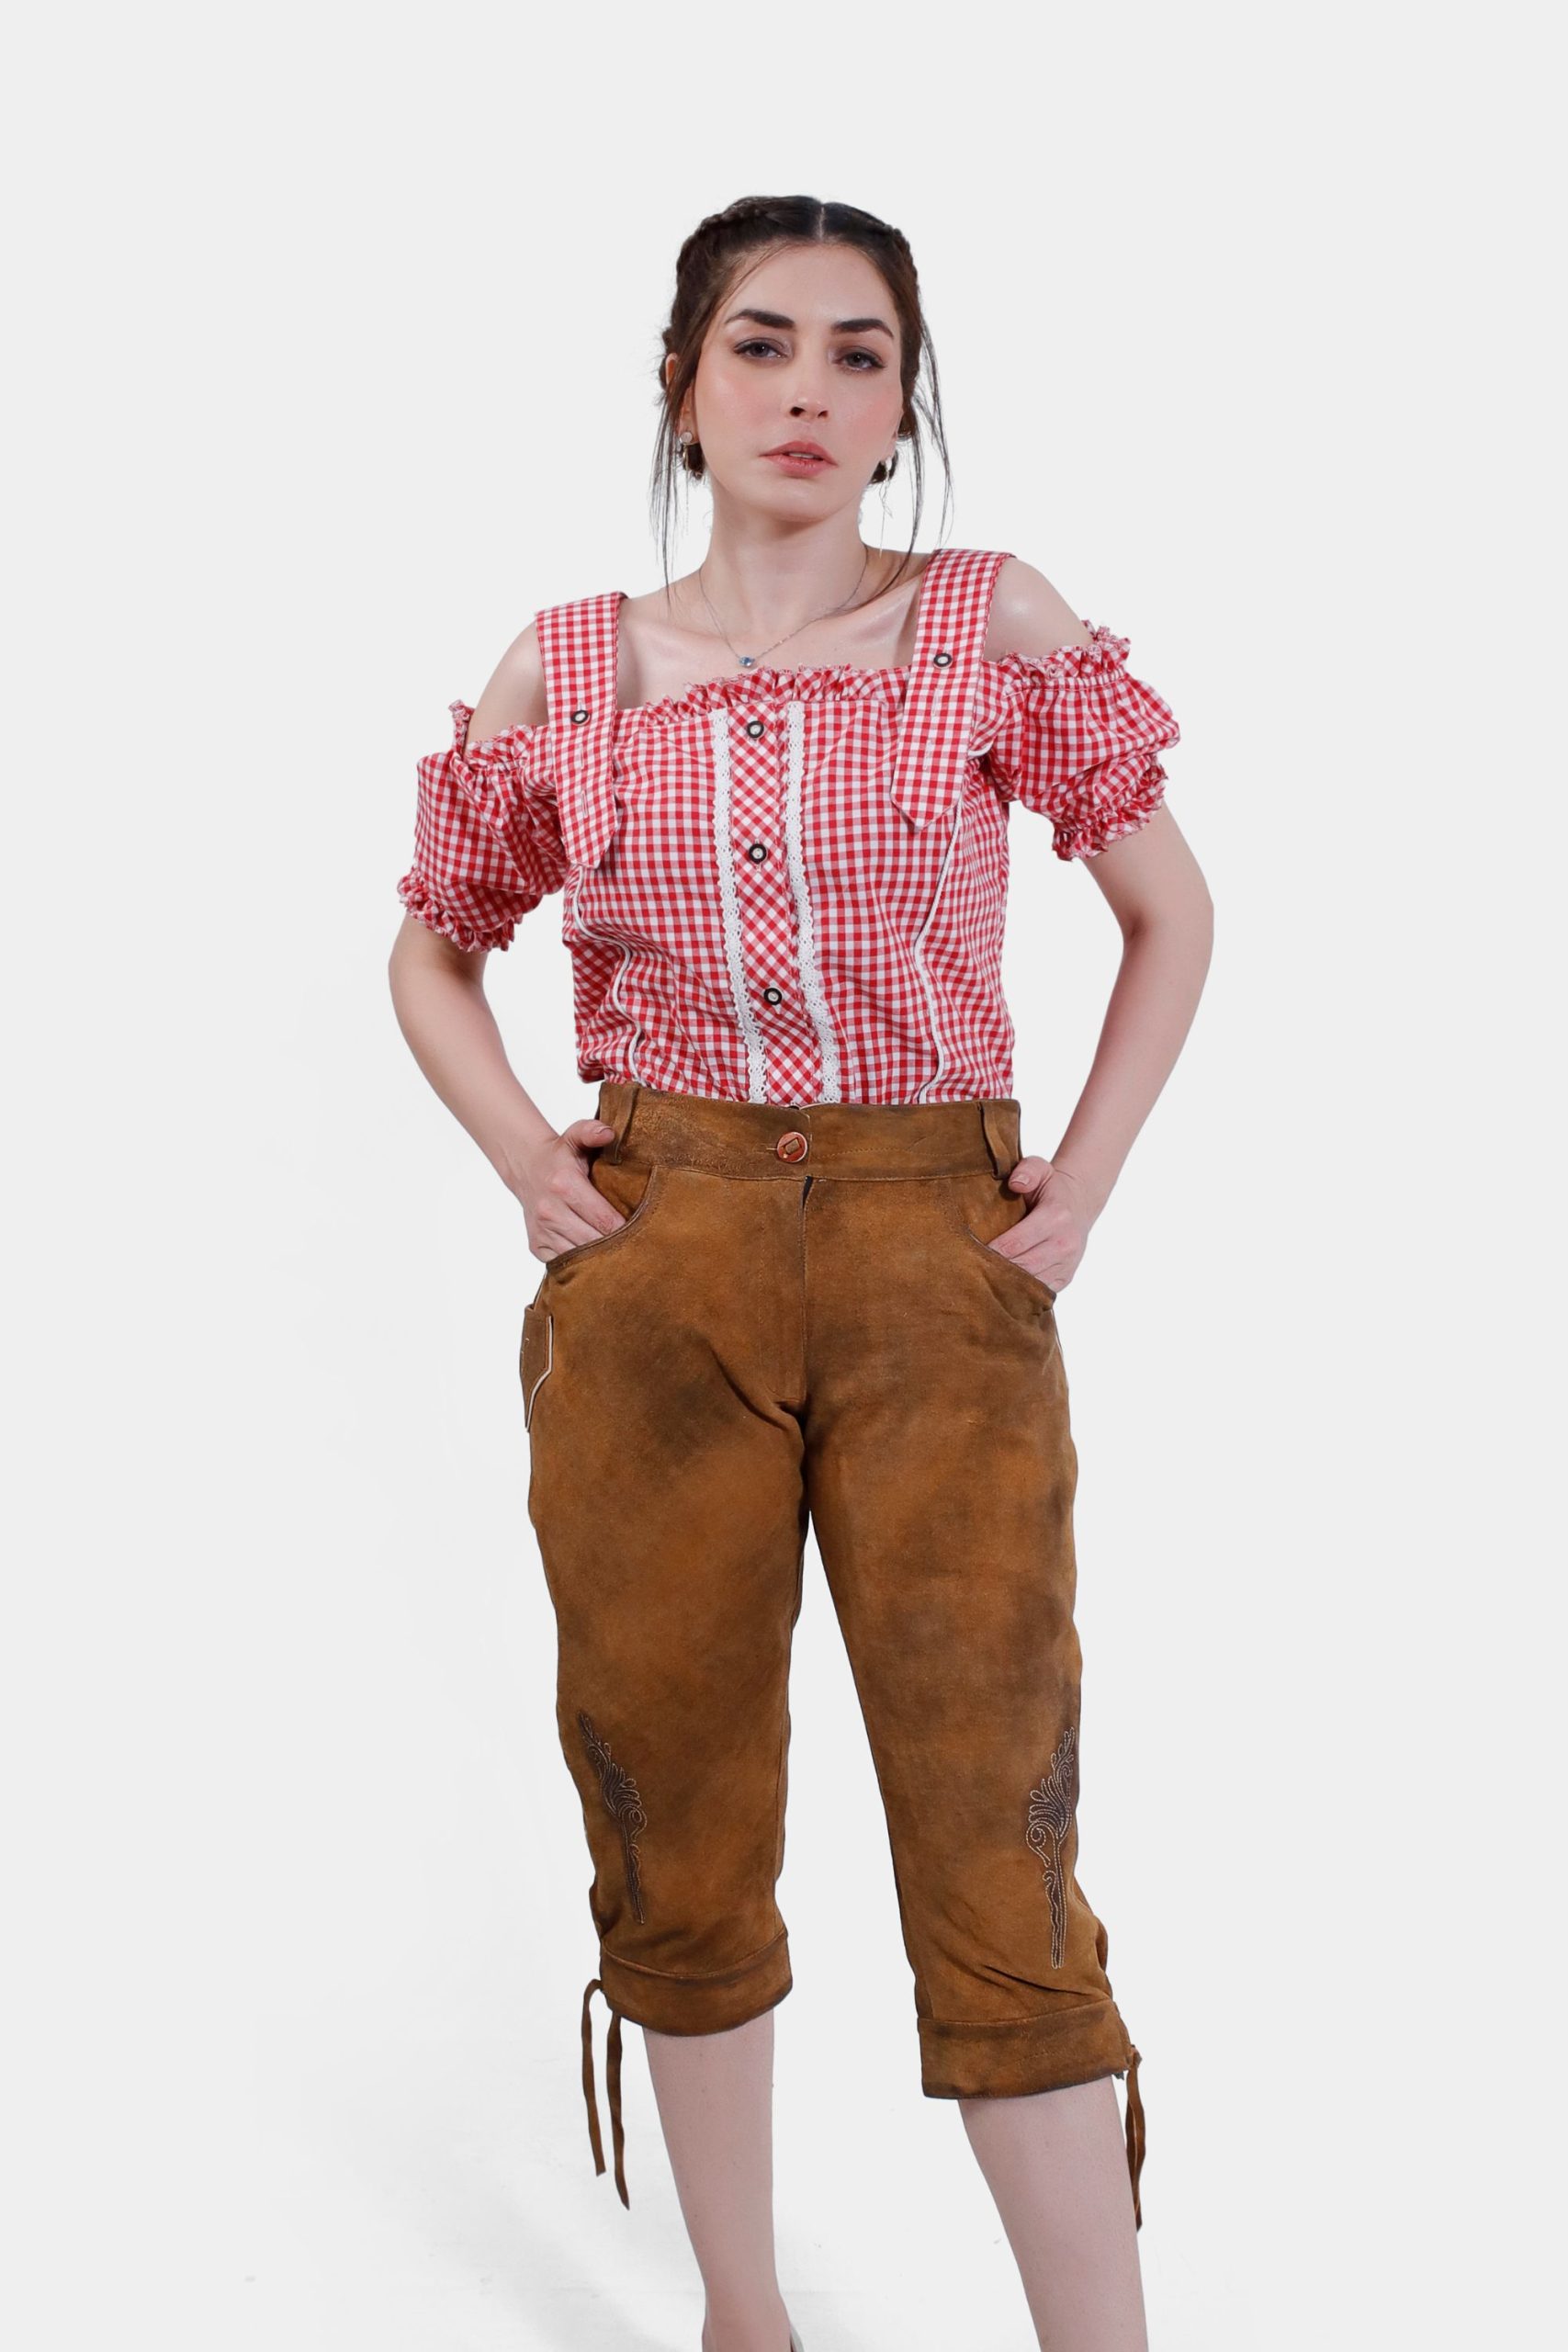 A woman wearing a red checkered off-shoulder blouse paired with brown leather lederhosen. She stands confidently with her hands in her pockets, showcasing the detailed embroidery on the lederhosen.